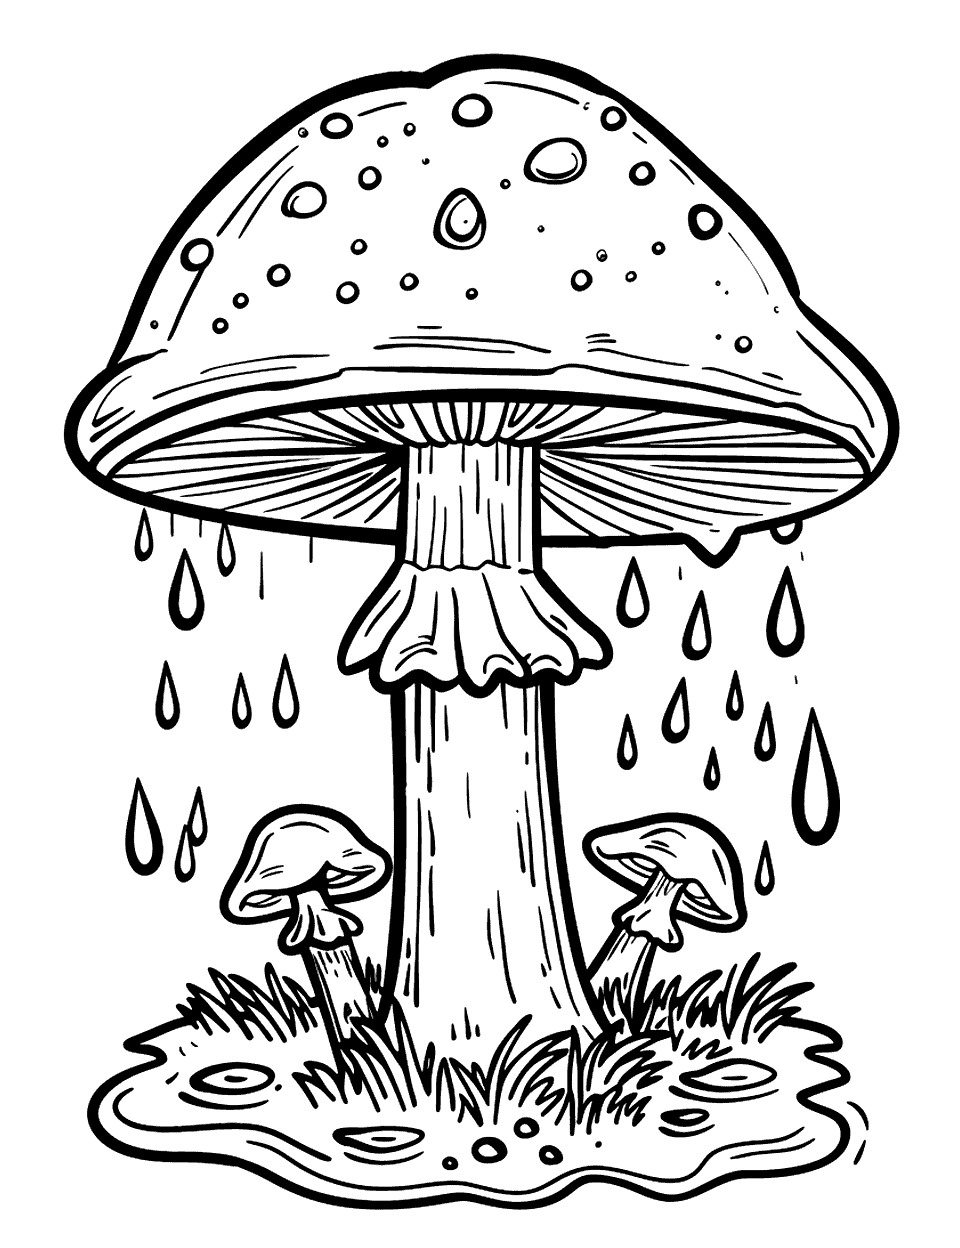 Rainy Mushroom Scene Coloring Page - A large mushroom under which raindrops are falling, with puddles forming around.